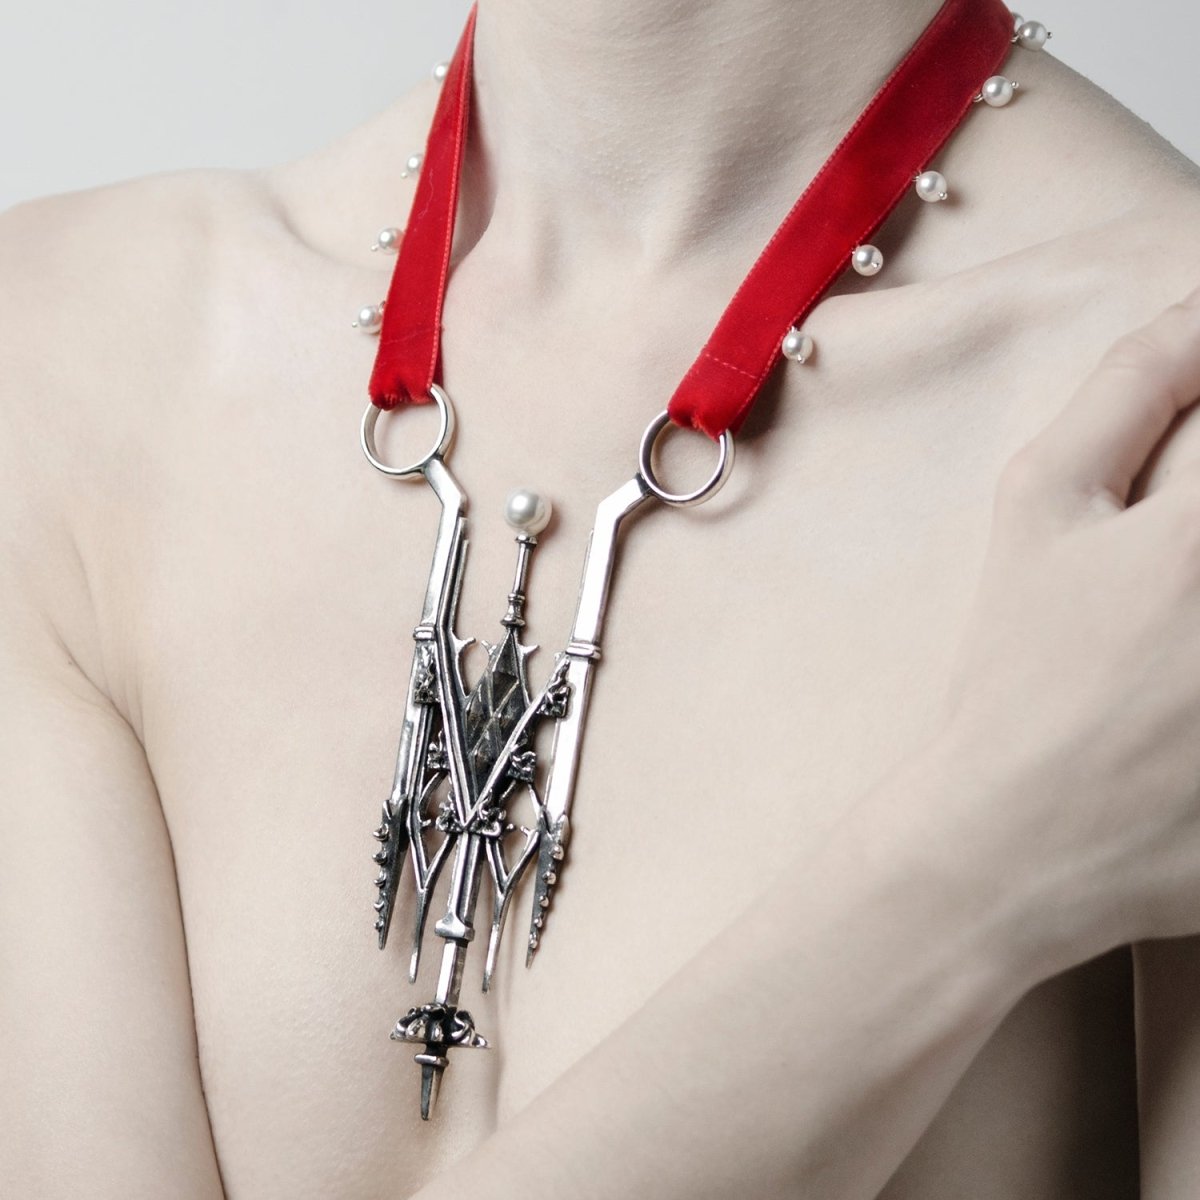 PINNACLE NECKLACE - Macabre Gadgets Store